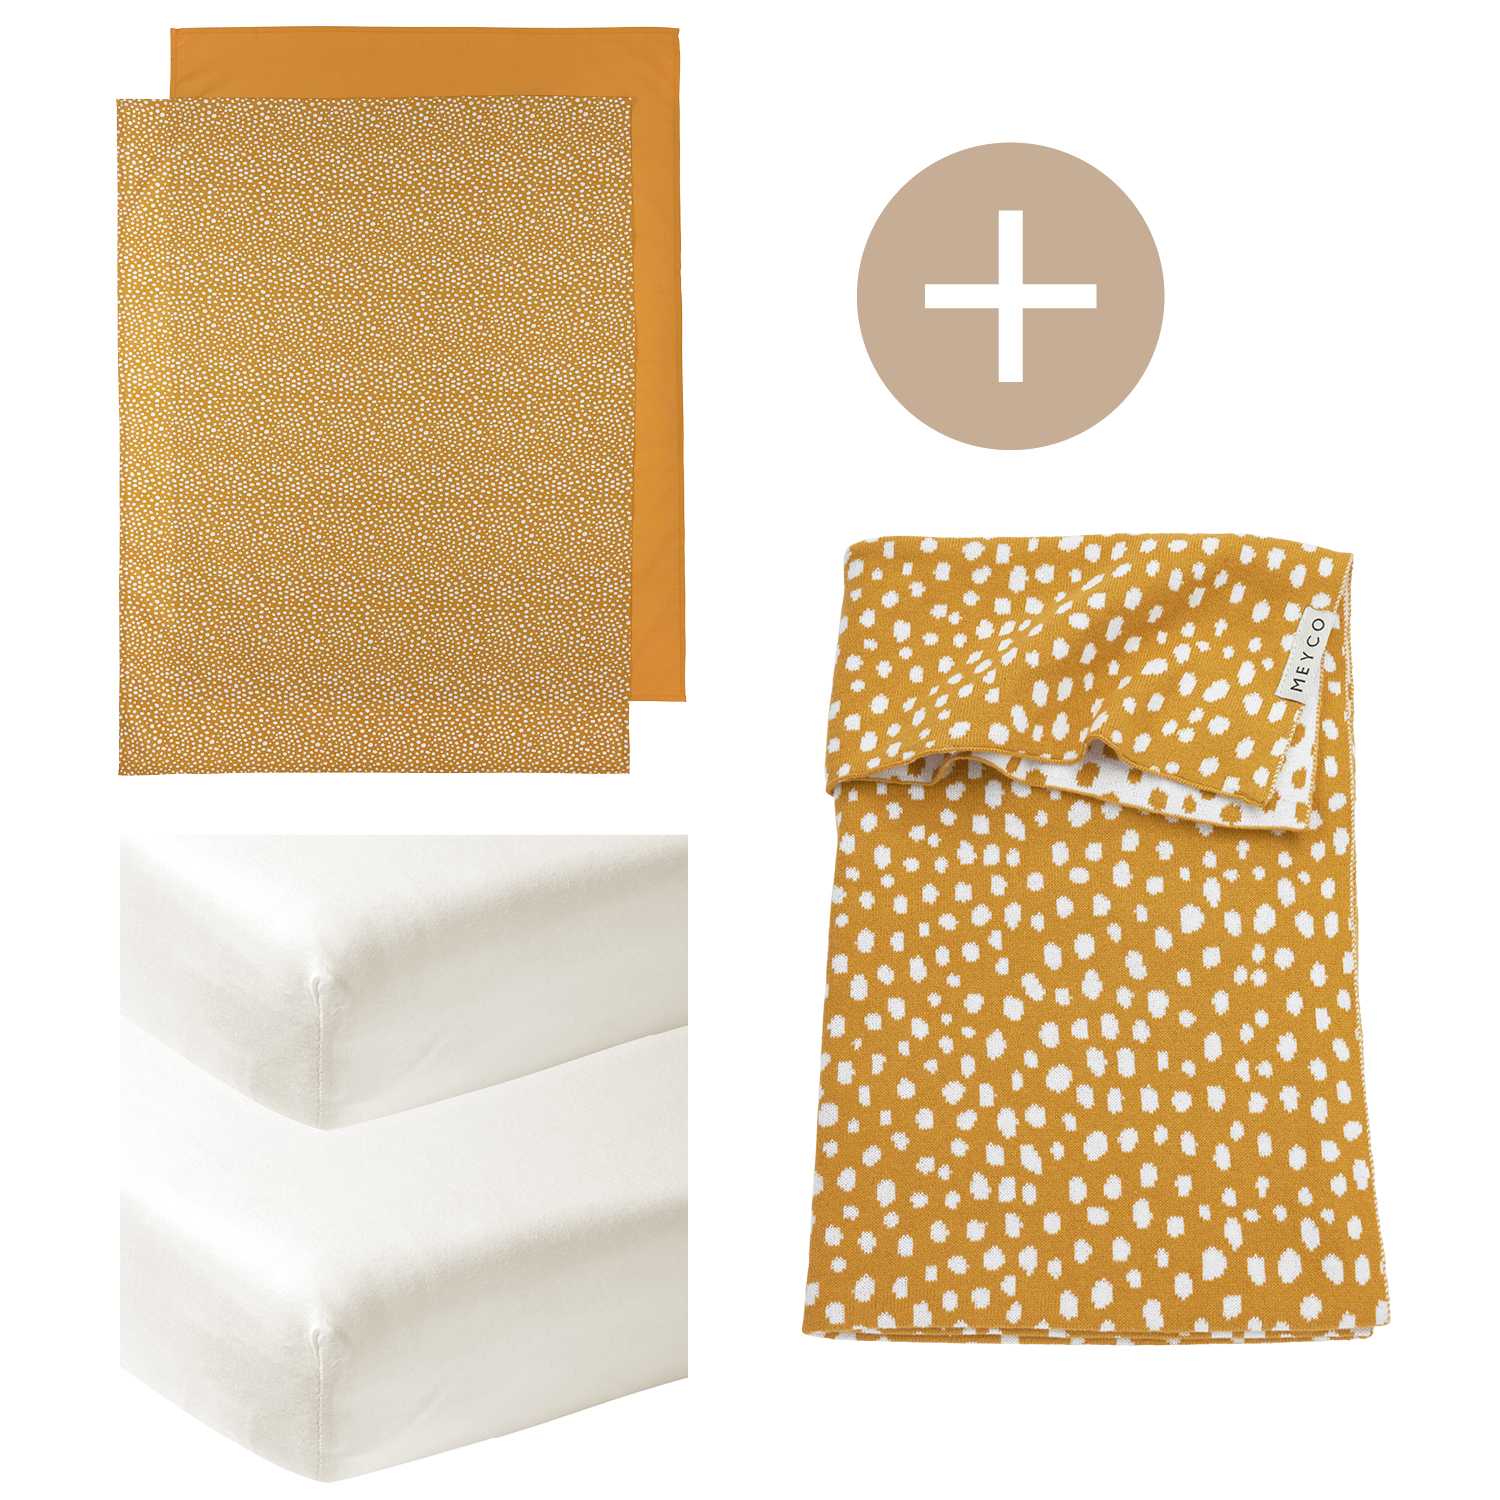 Cot bed blanket + 2-pack cot bed sheet + 2-pack fitted sheet cot bed Cheetah - honey gold - 100x150cm